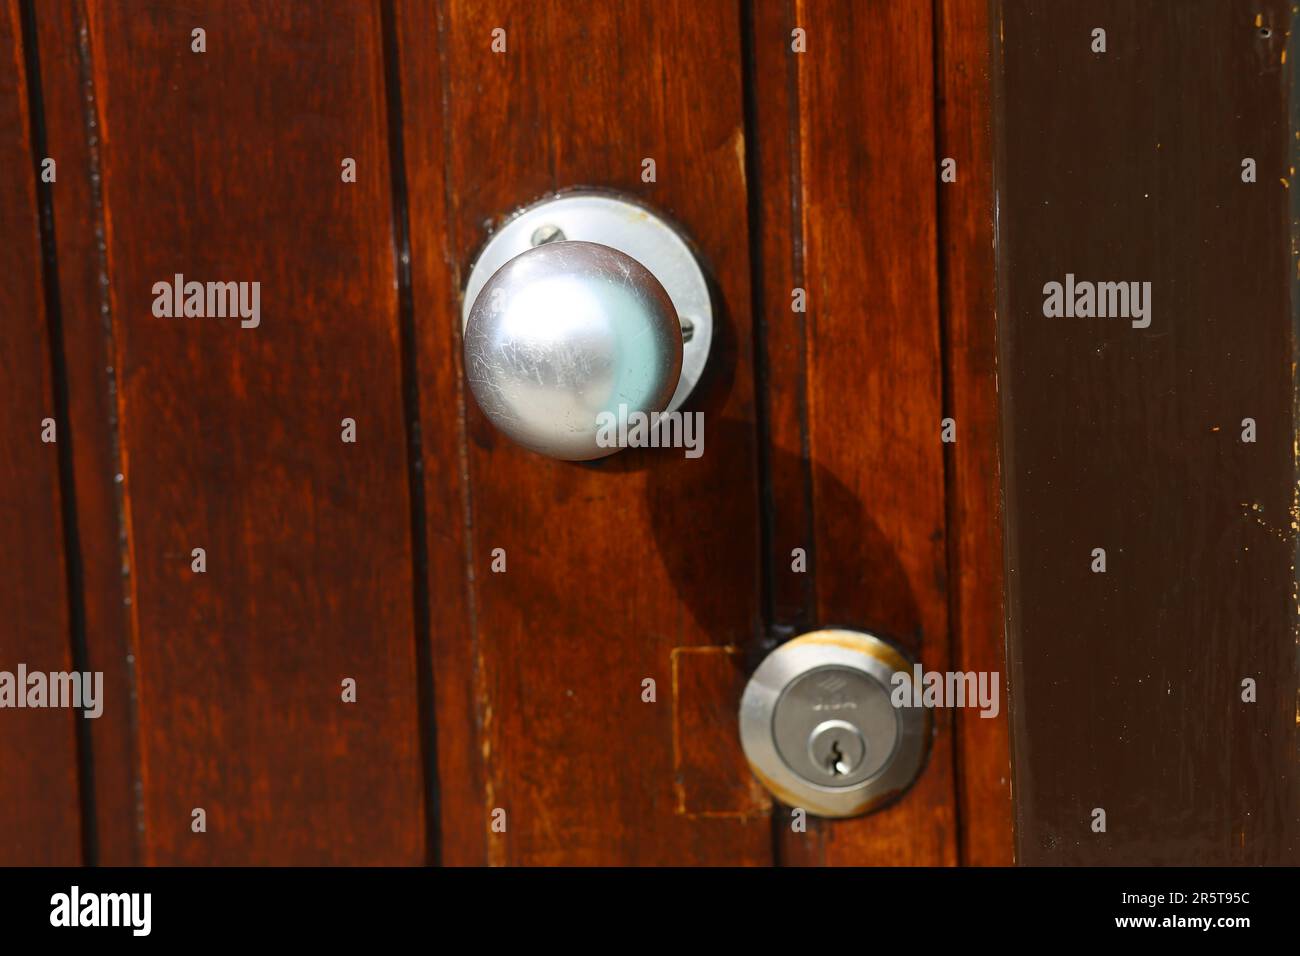 A vintage lock on an aged wooden door with a dark brown finish Stock Photo